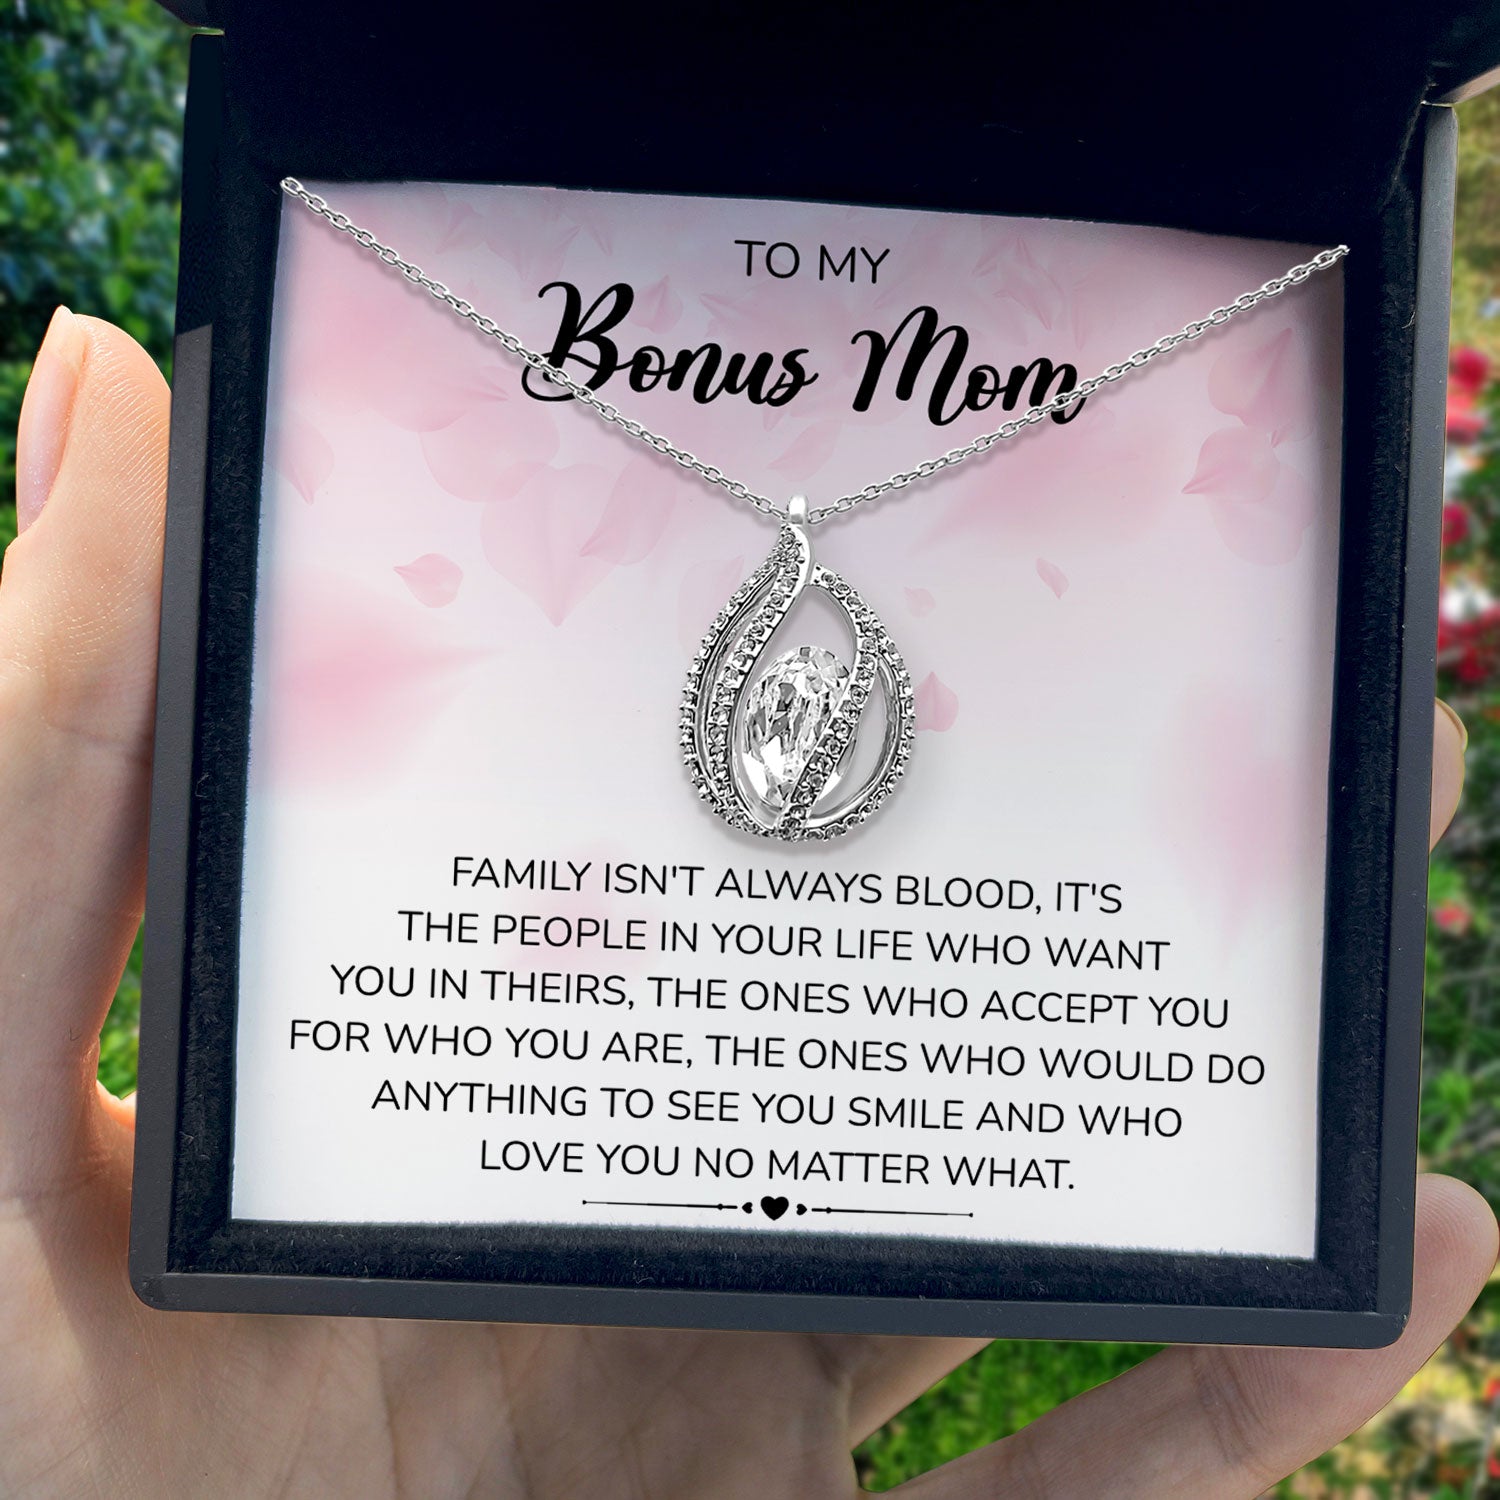 FOREVER LOVE NECKLACE Boyfriends Mom Gift, Gifts for Boyfriend's